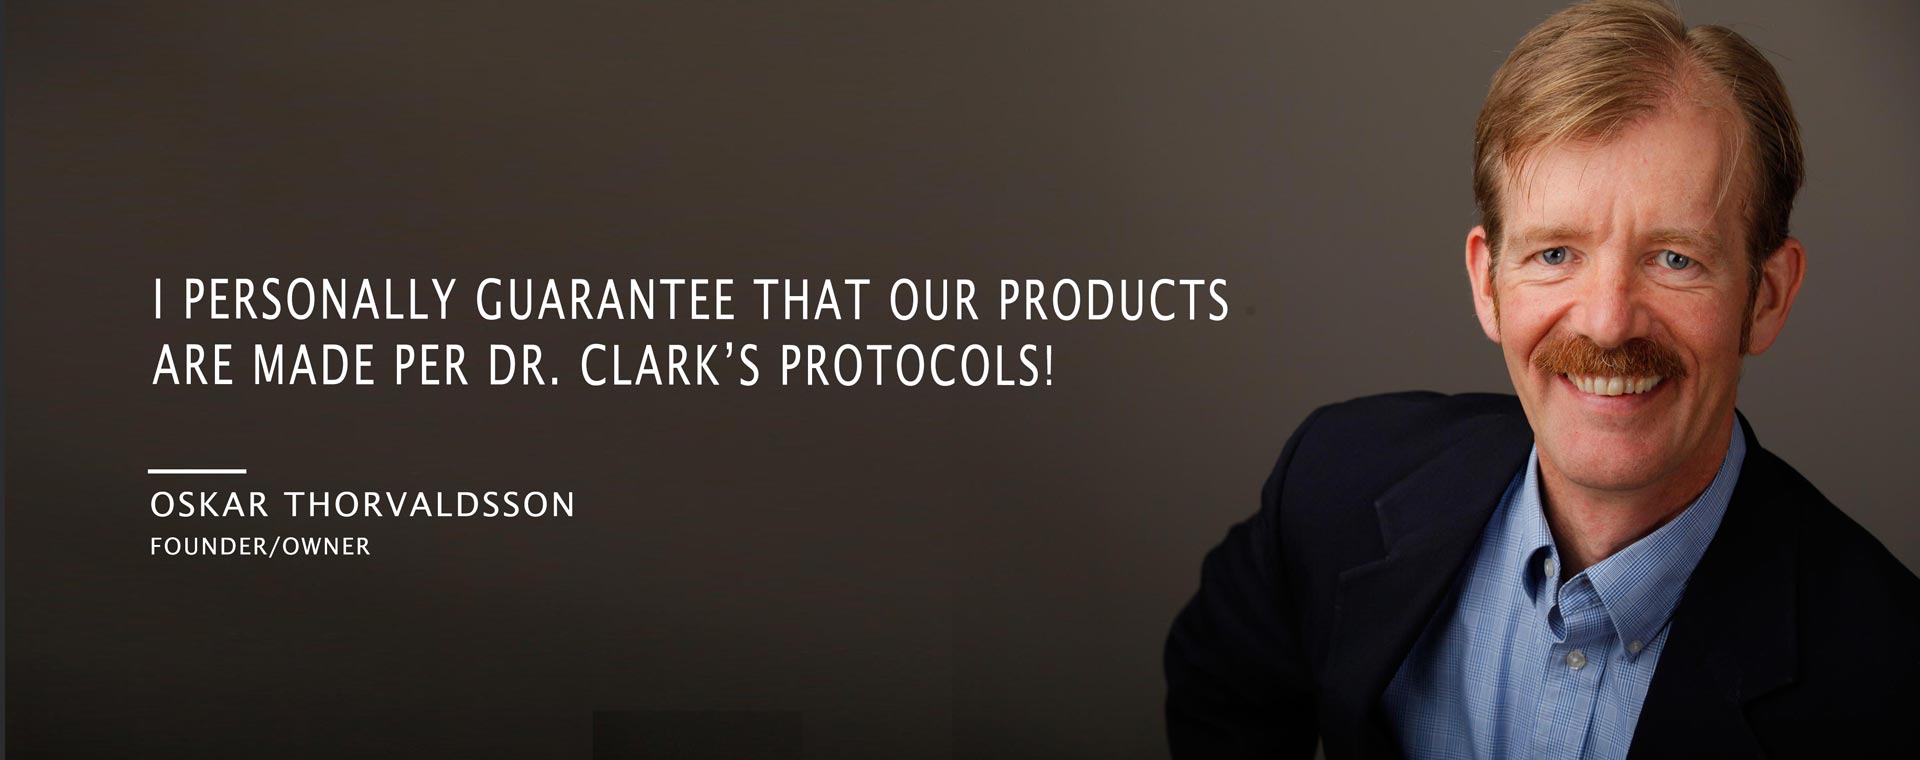 I personally guarantee that our products are made per dr.clark's protocols